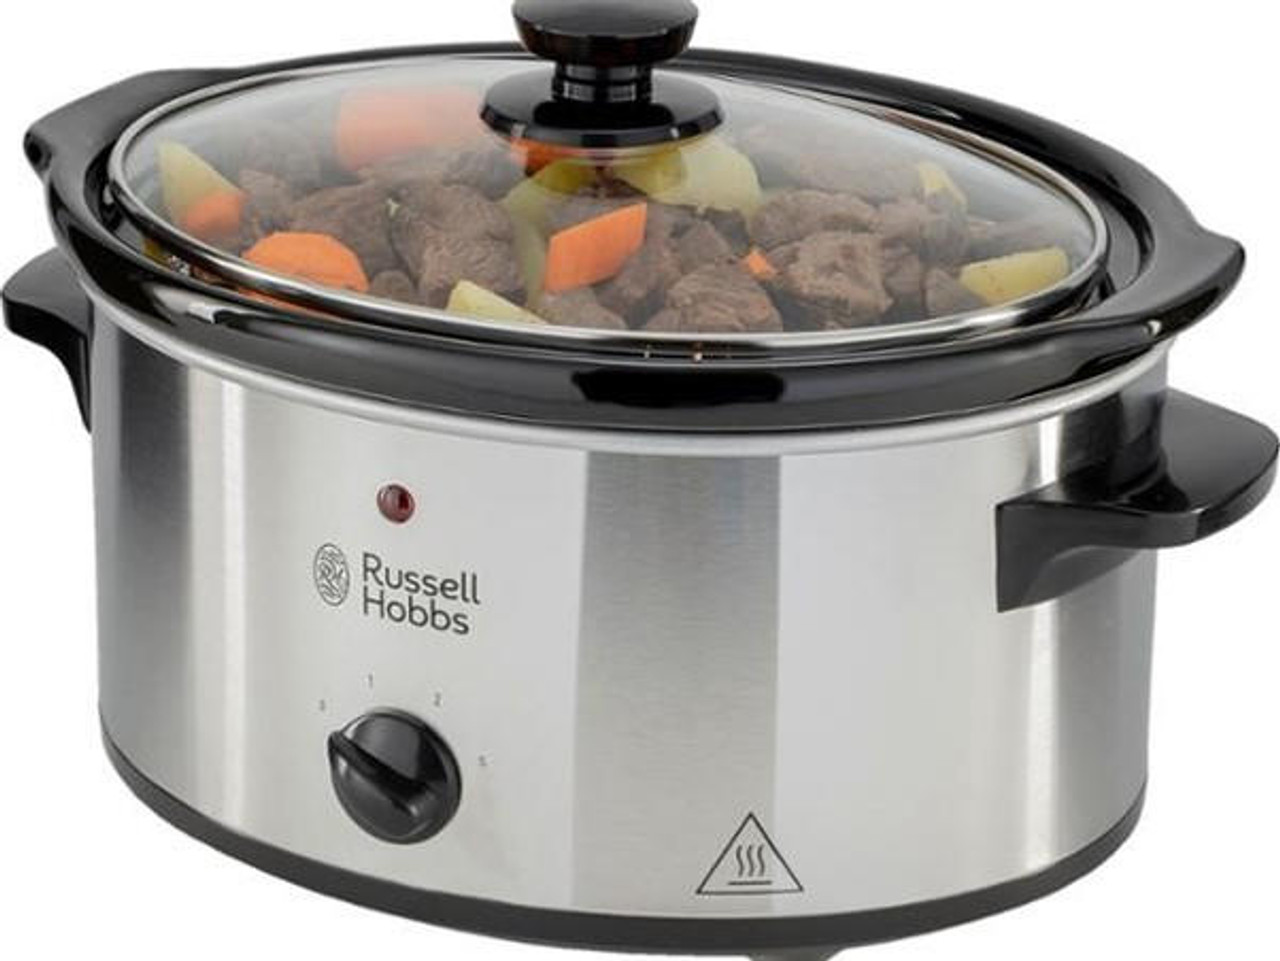 Russell Hobbs 3.5L Stainless Steel Slow Cooker